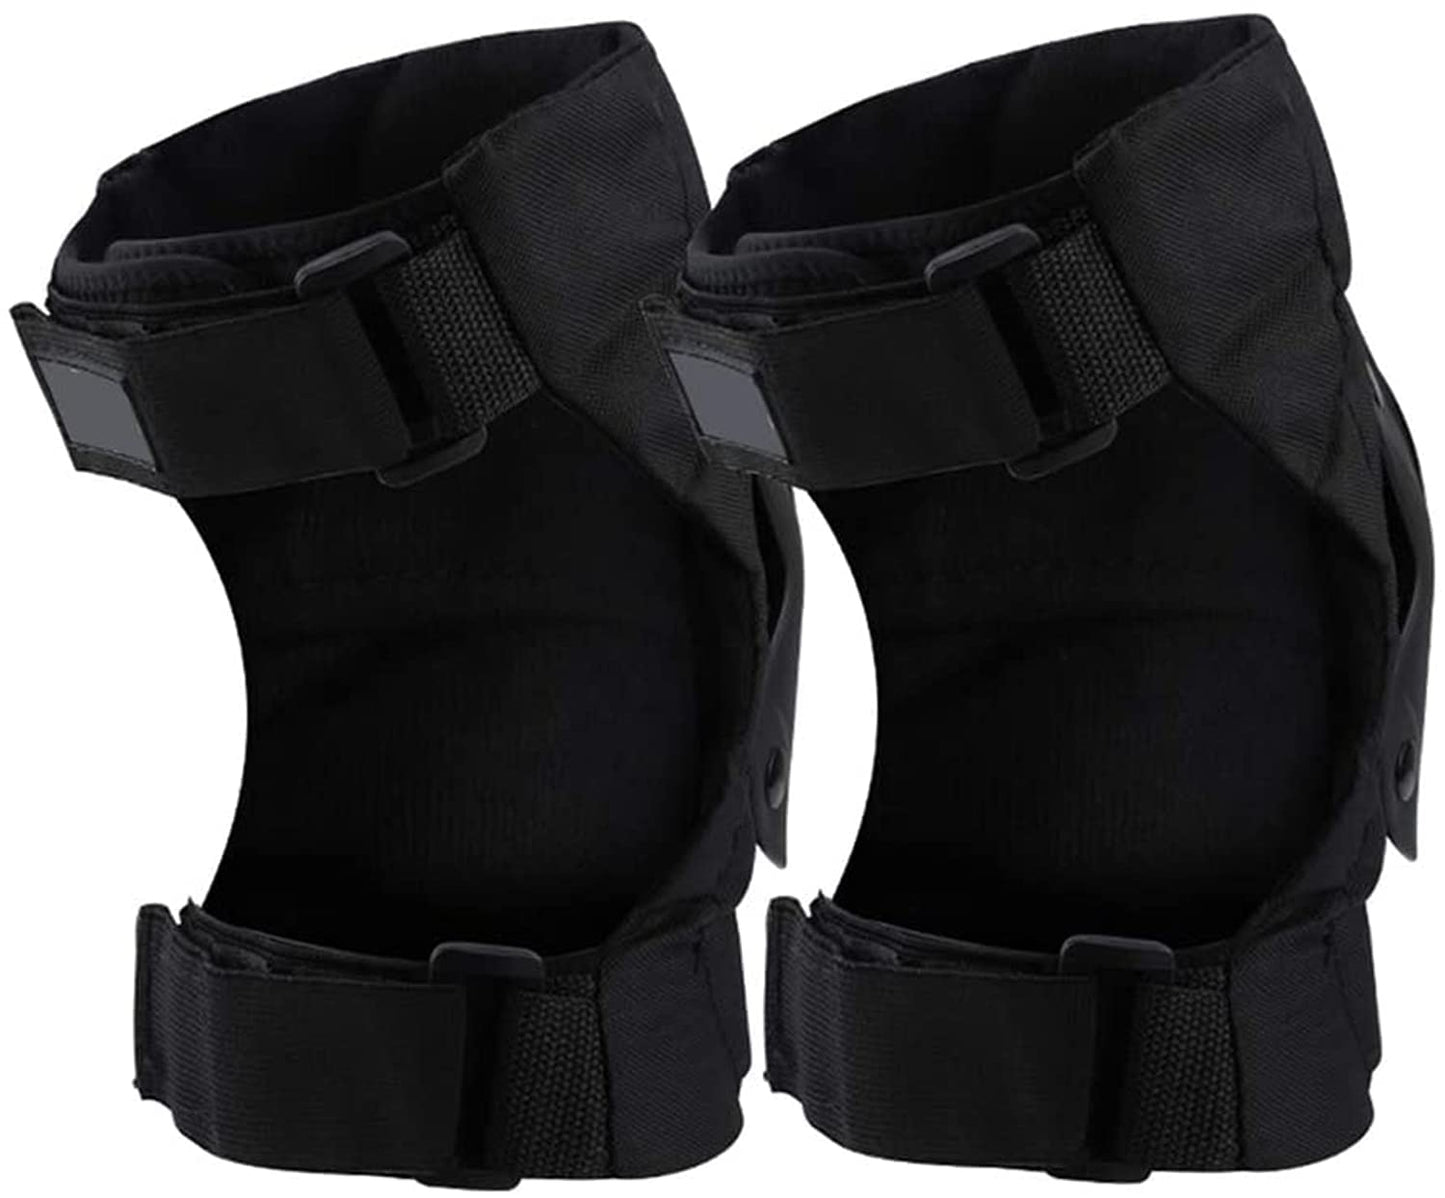 Knee Pads, Adult Adjustable Knee Cap Pads Cycling Knee Brace and Elbow Guards, Protector for Bike Motorcycle Cycling Racing Outdoor Active Knee Protector Gear (1 Pair - Black)